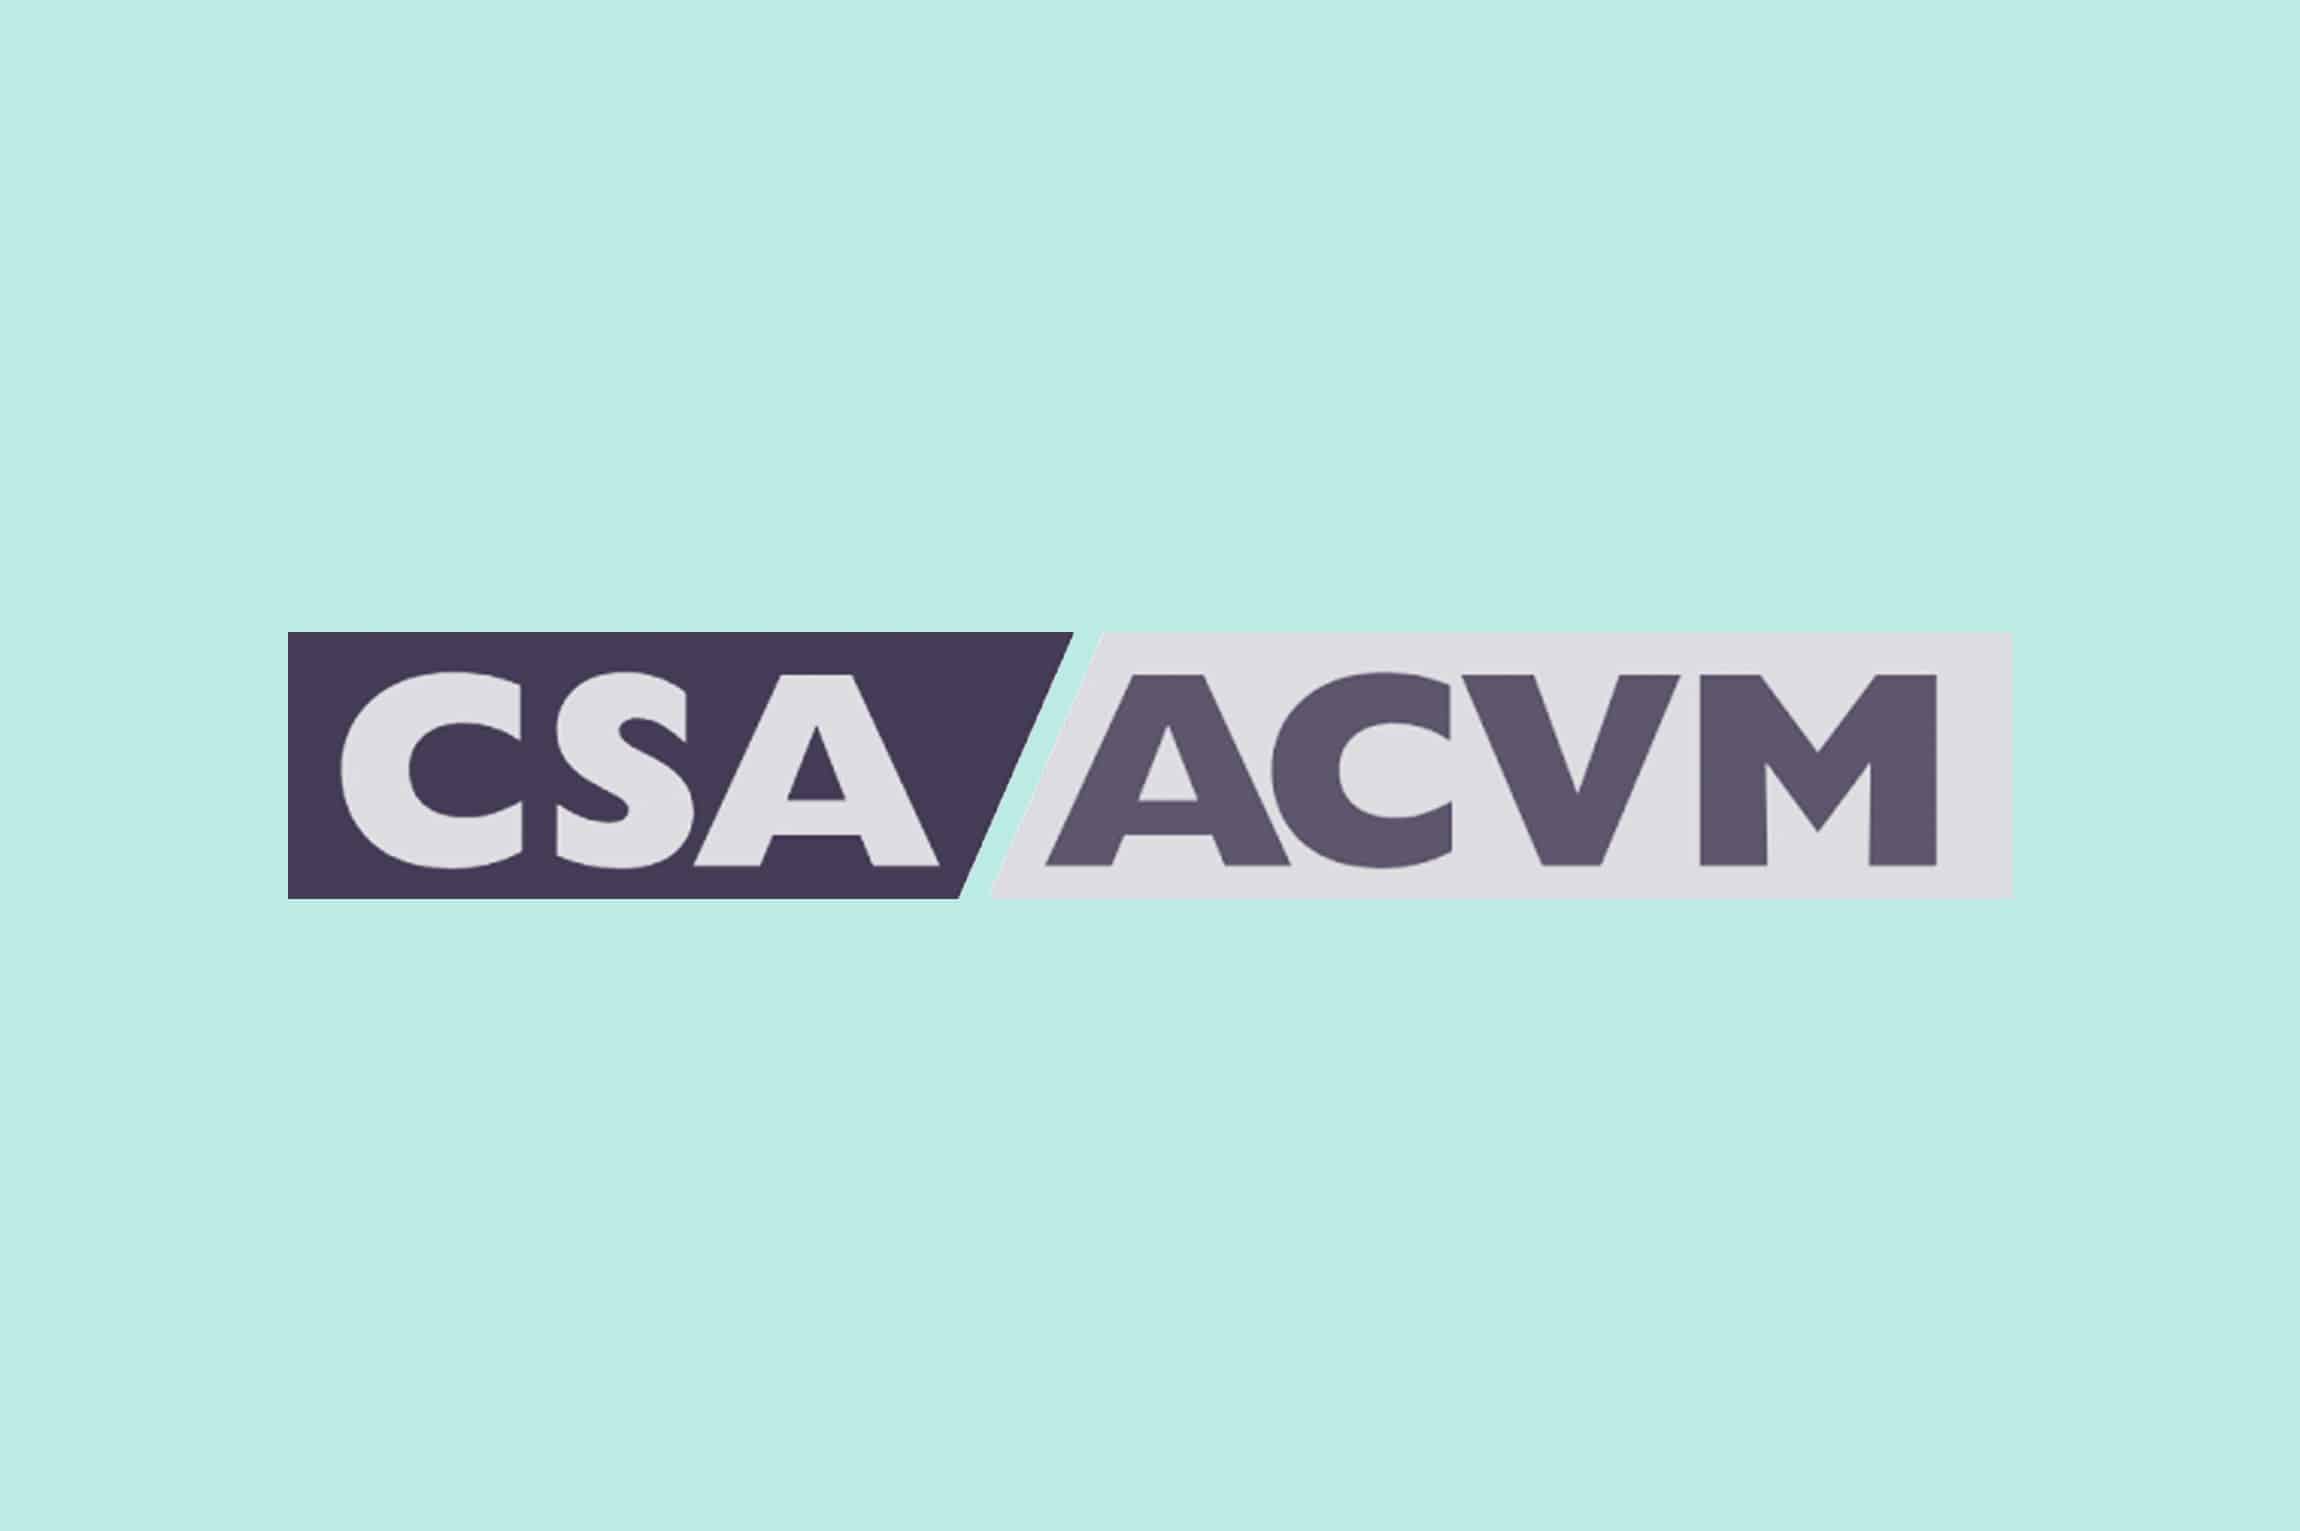 CSA AVM on a green background